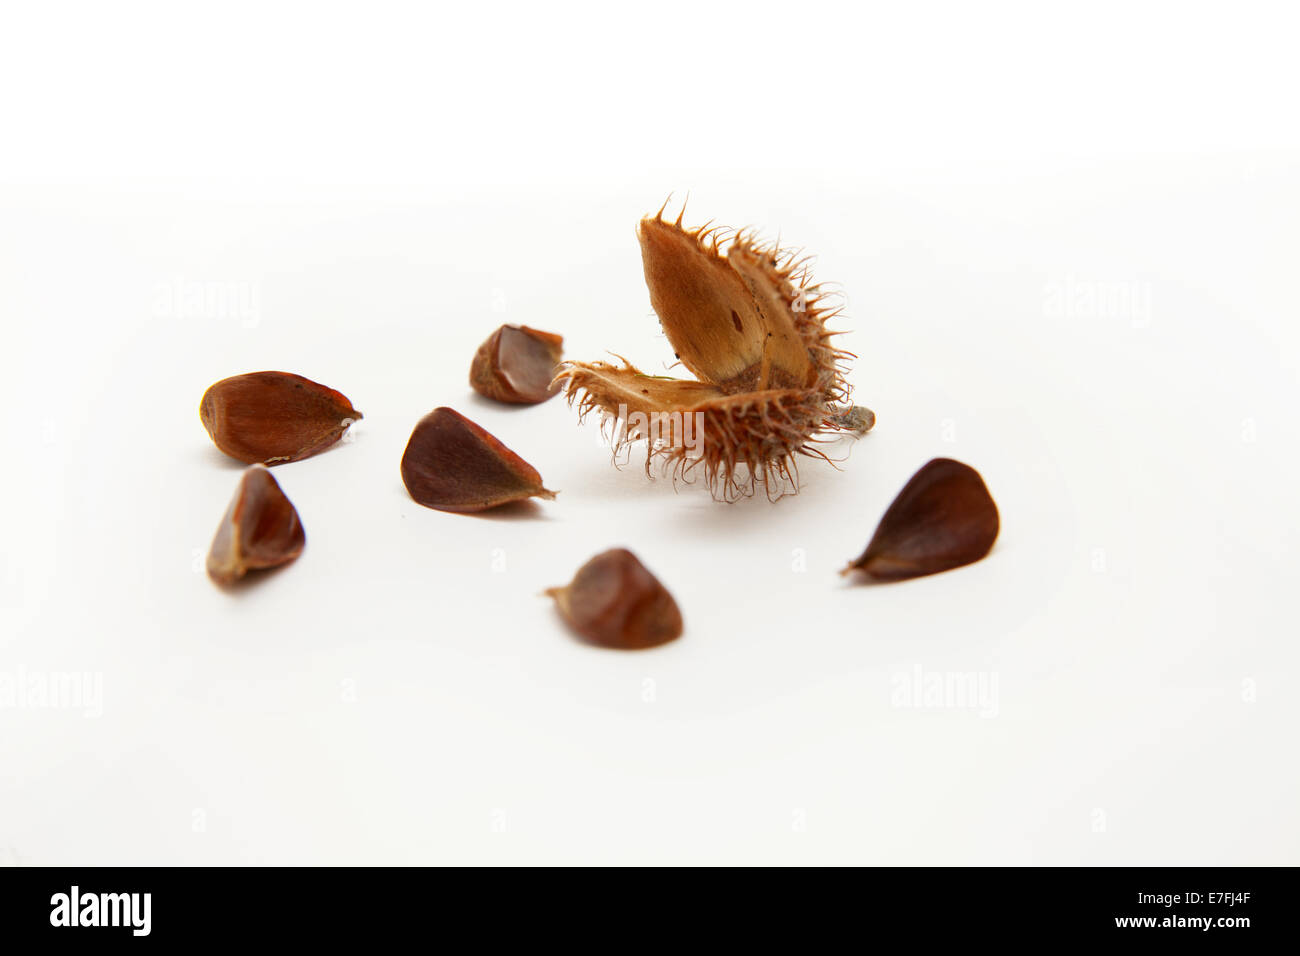 Beech nuts with their shell. Fagus sylvatica, common beech tree nuts., Stock Photo